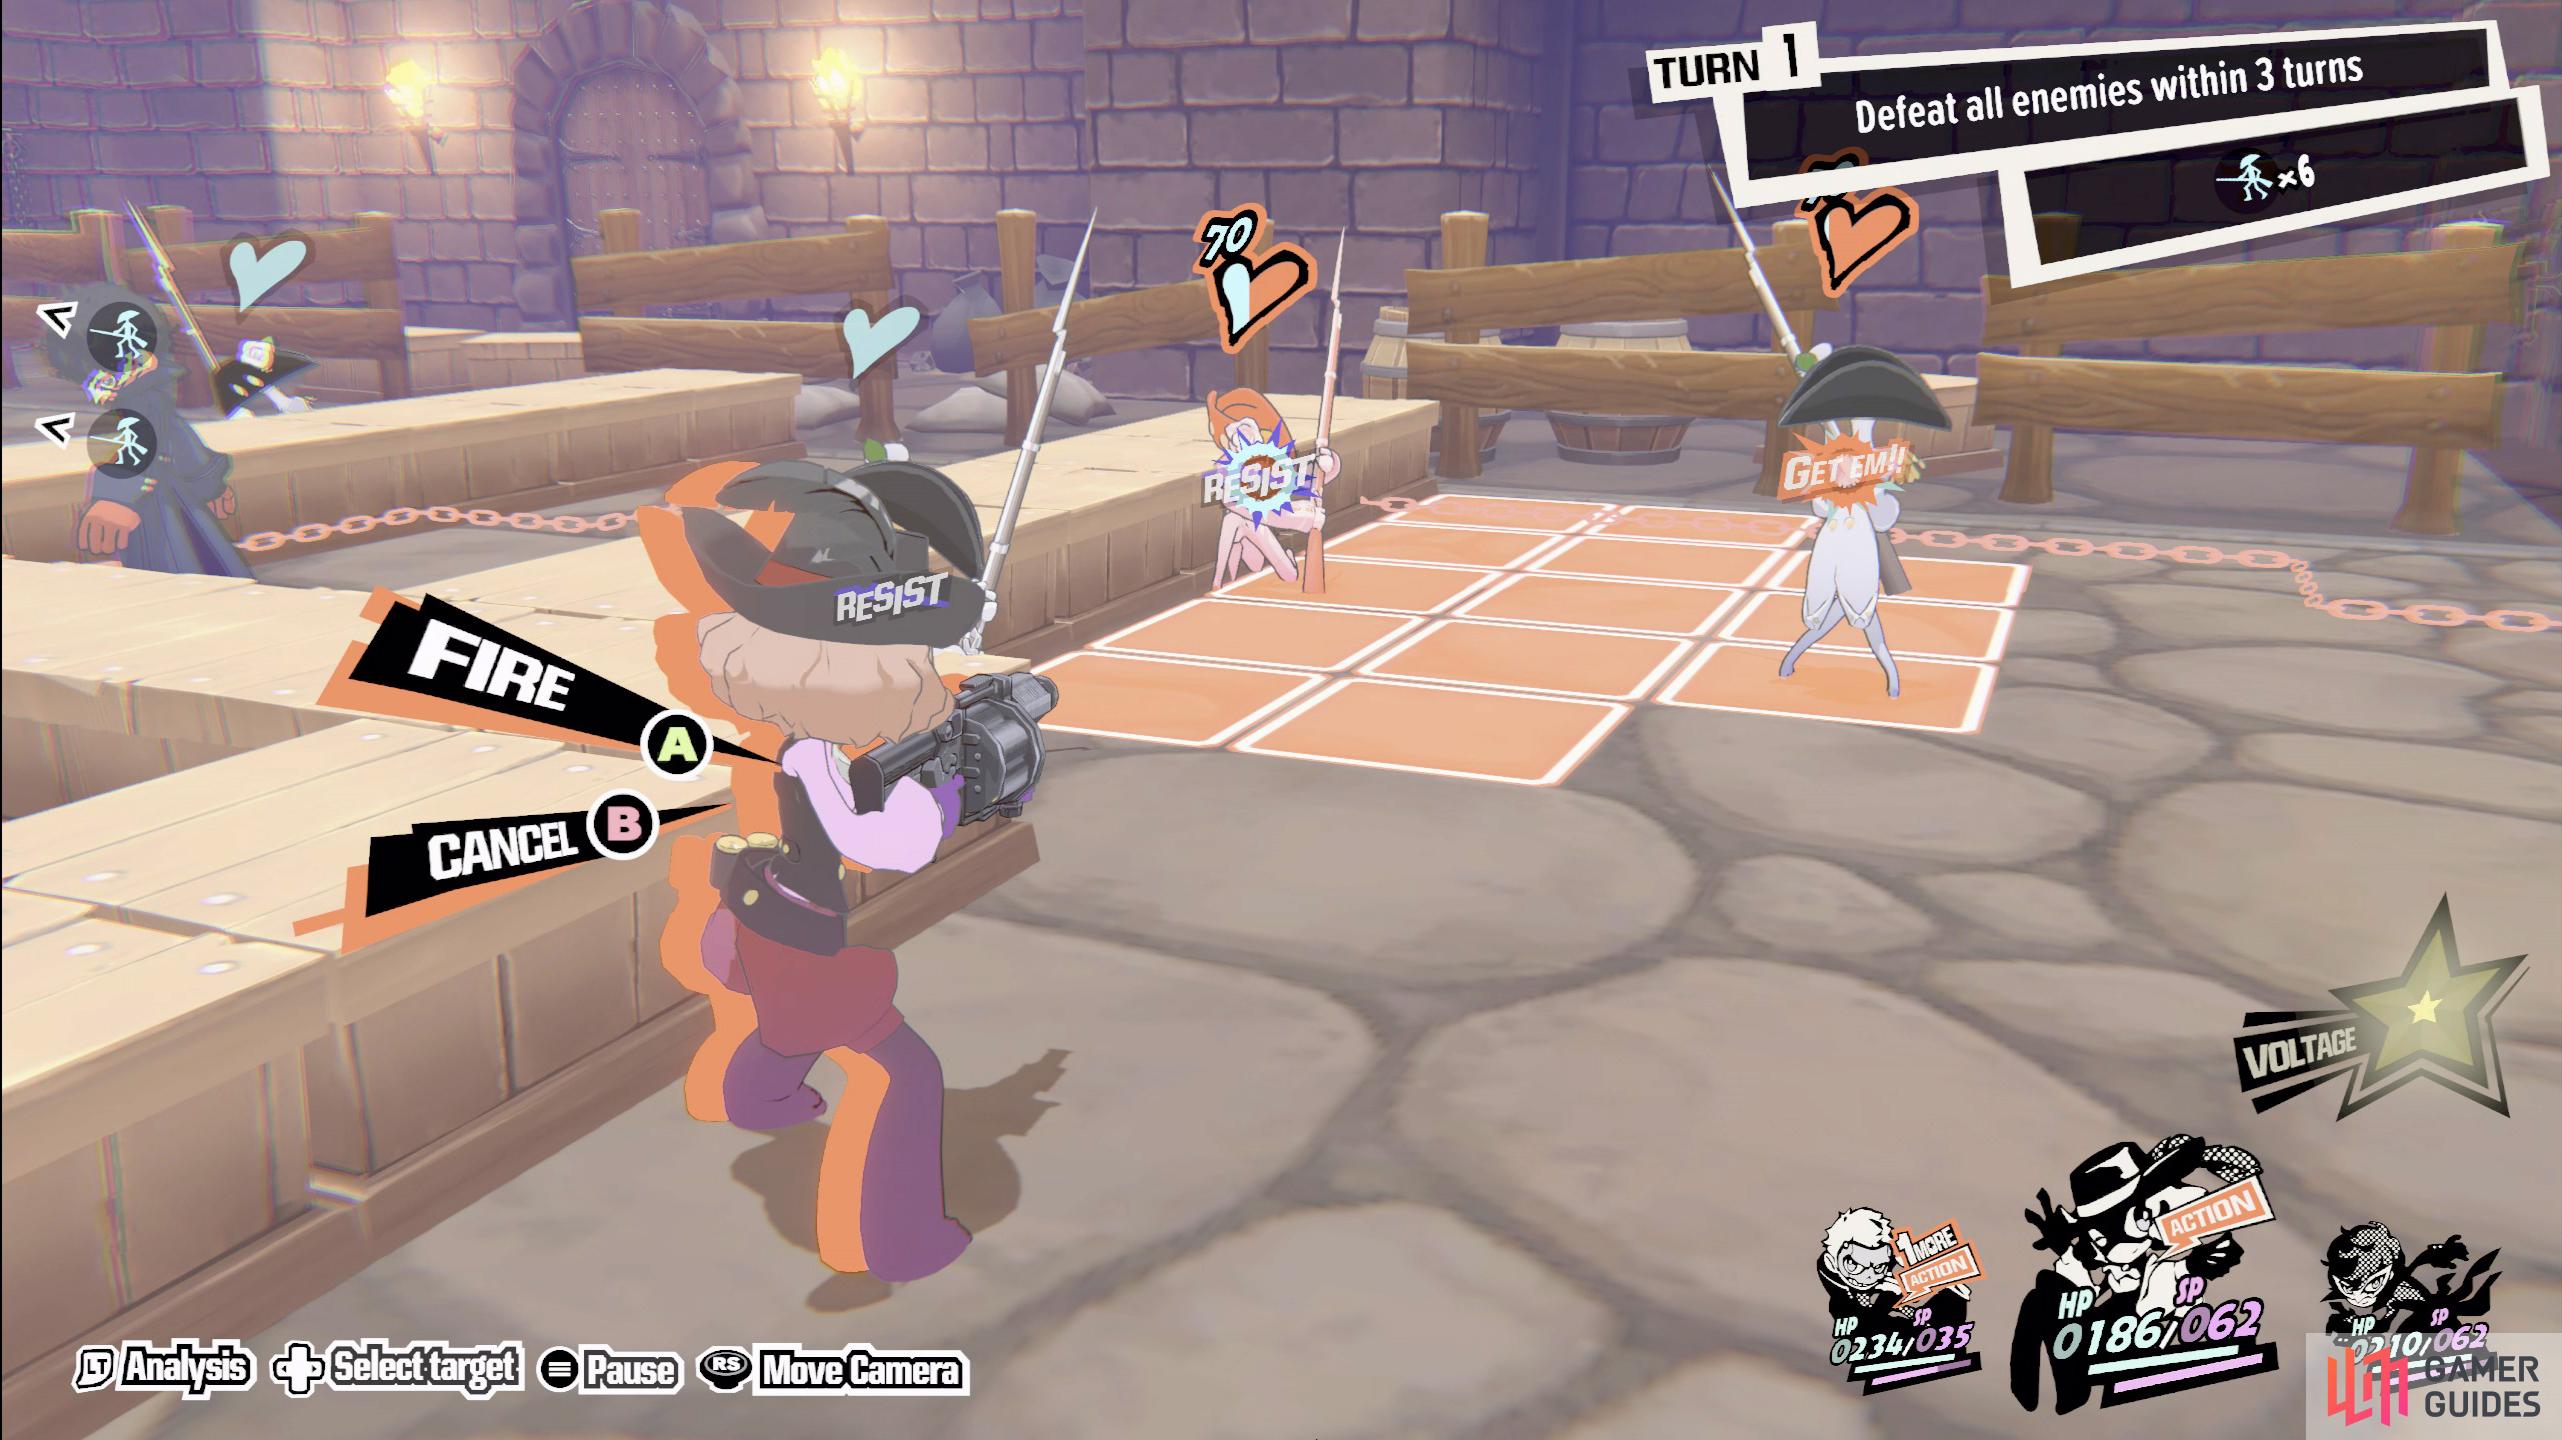 Use Haru's gun to target the two enemies at the back which will give you One-More, and then attack them again to finish at least one off.